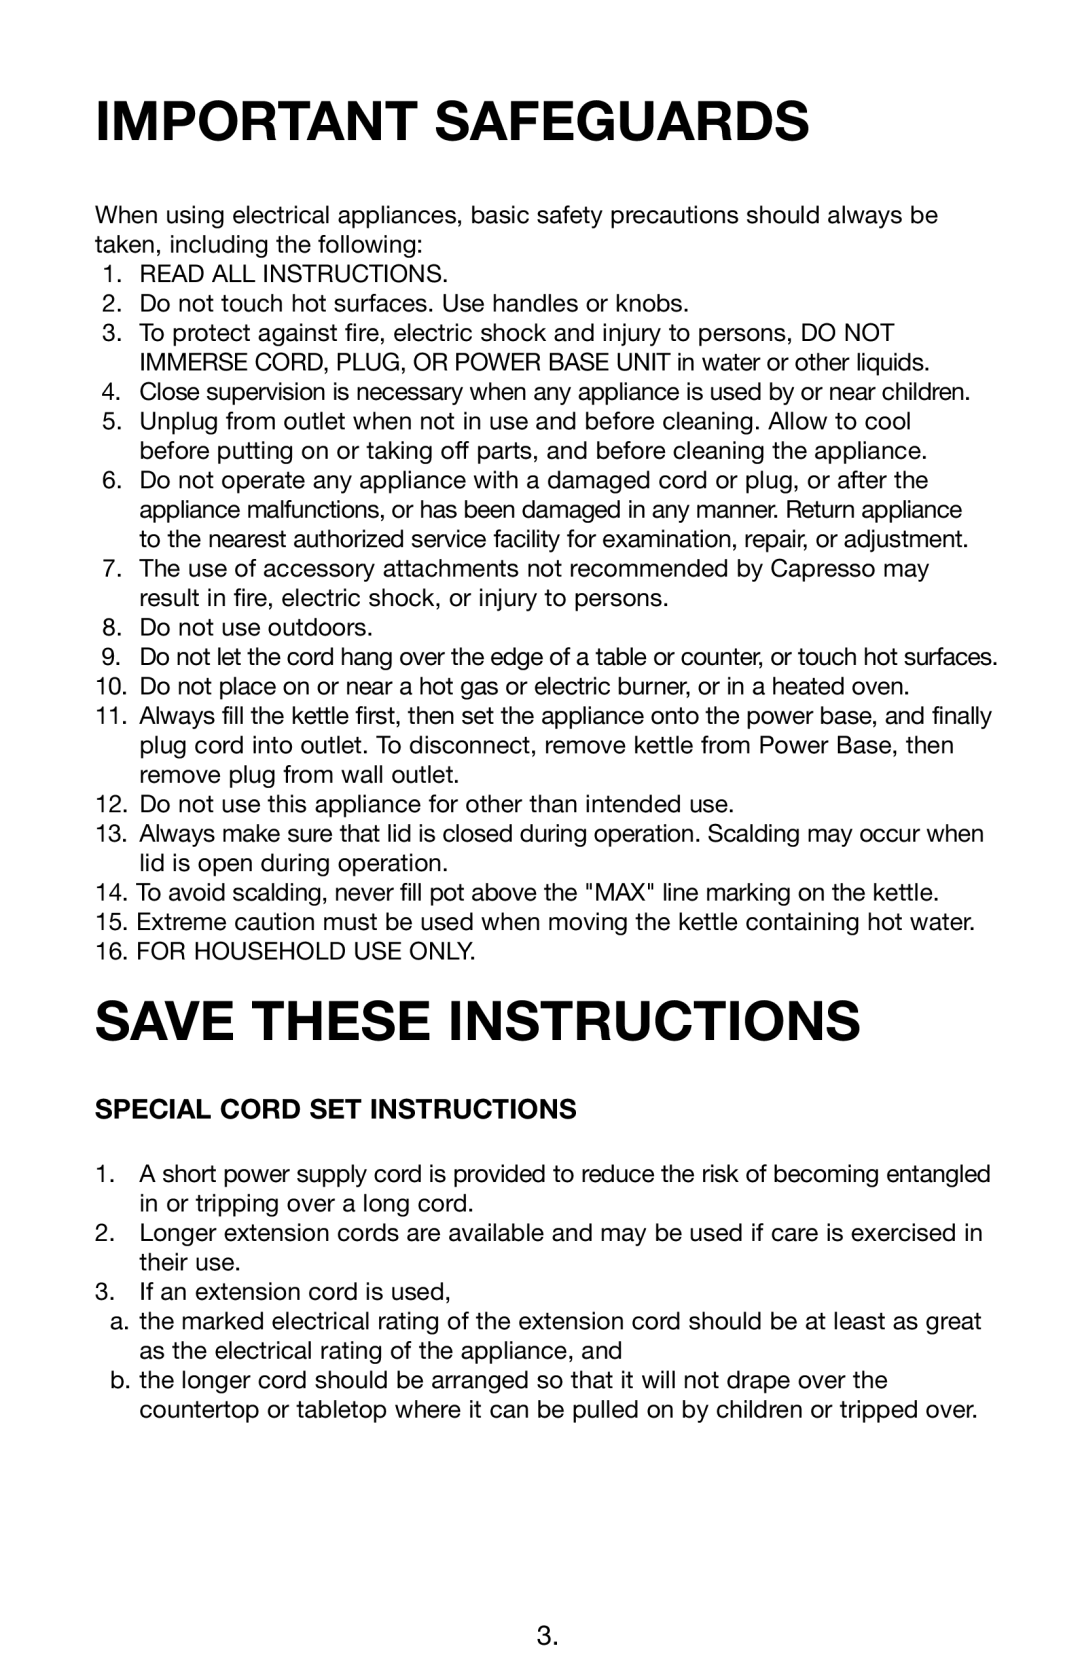 Capresso 276, 275 operating instructions Special Cord Set Instructions, Important Safeguards, Save These Instructions 